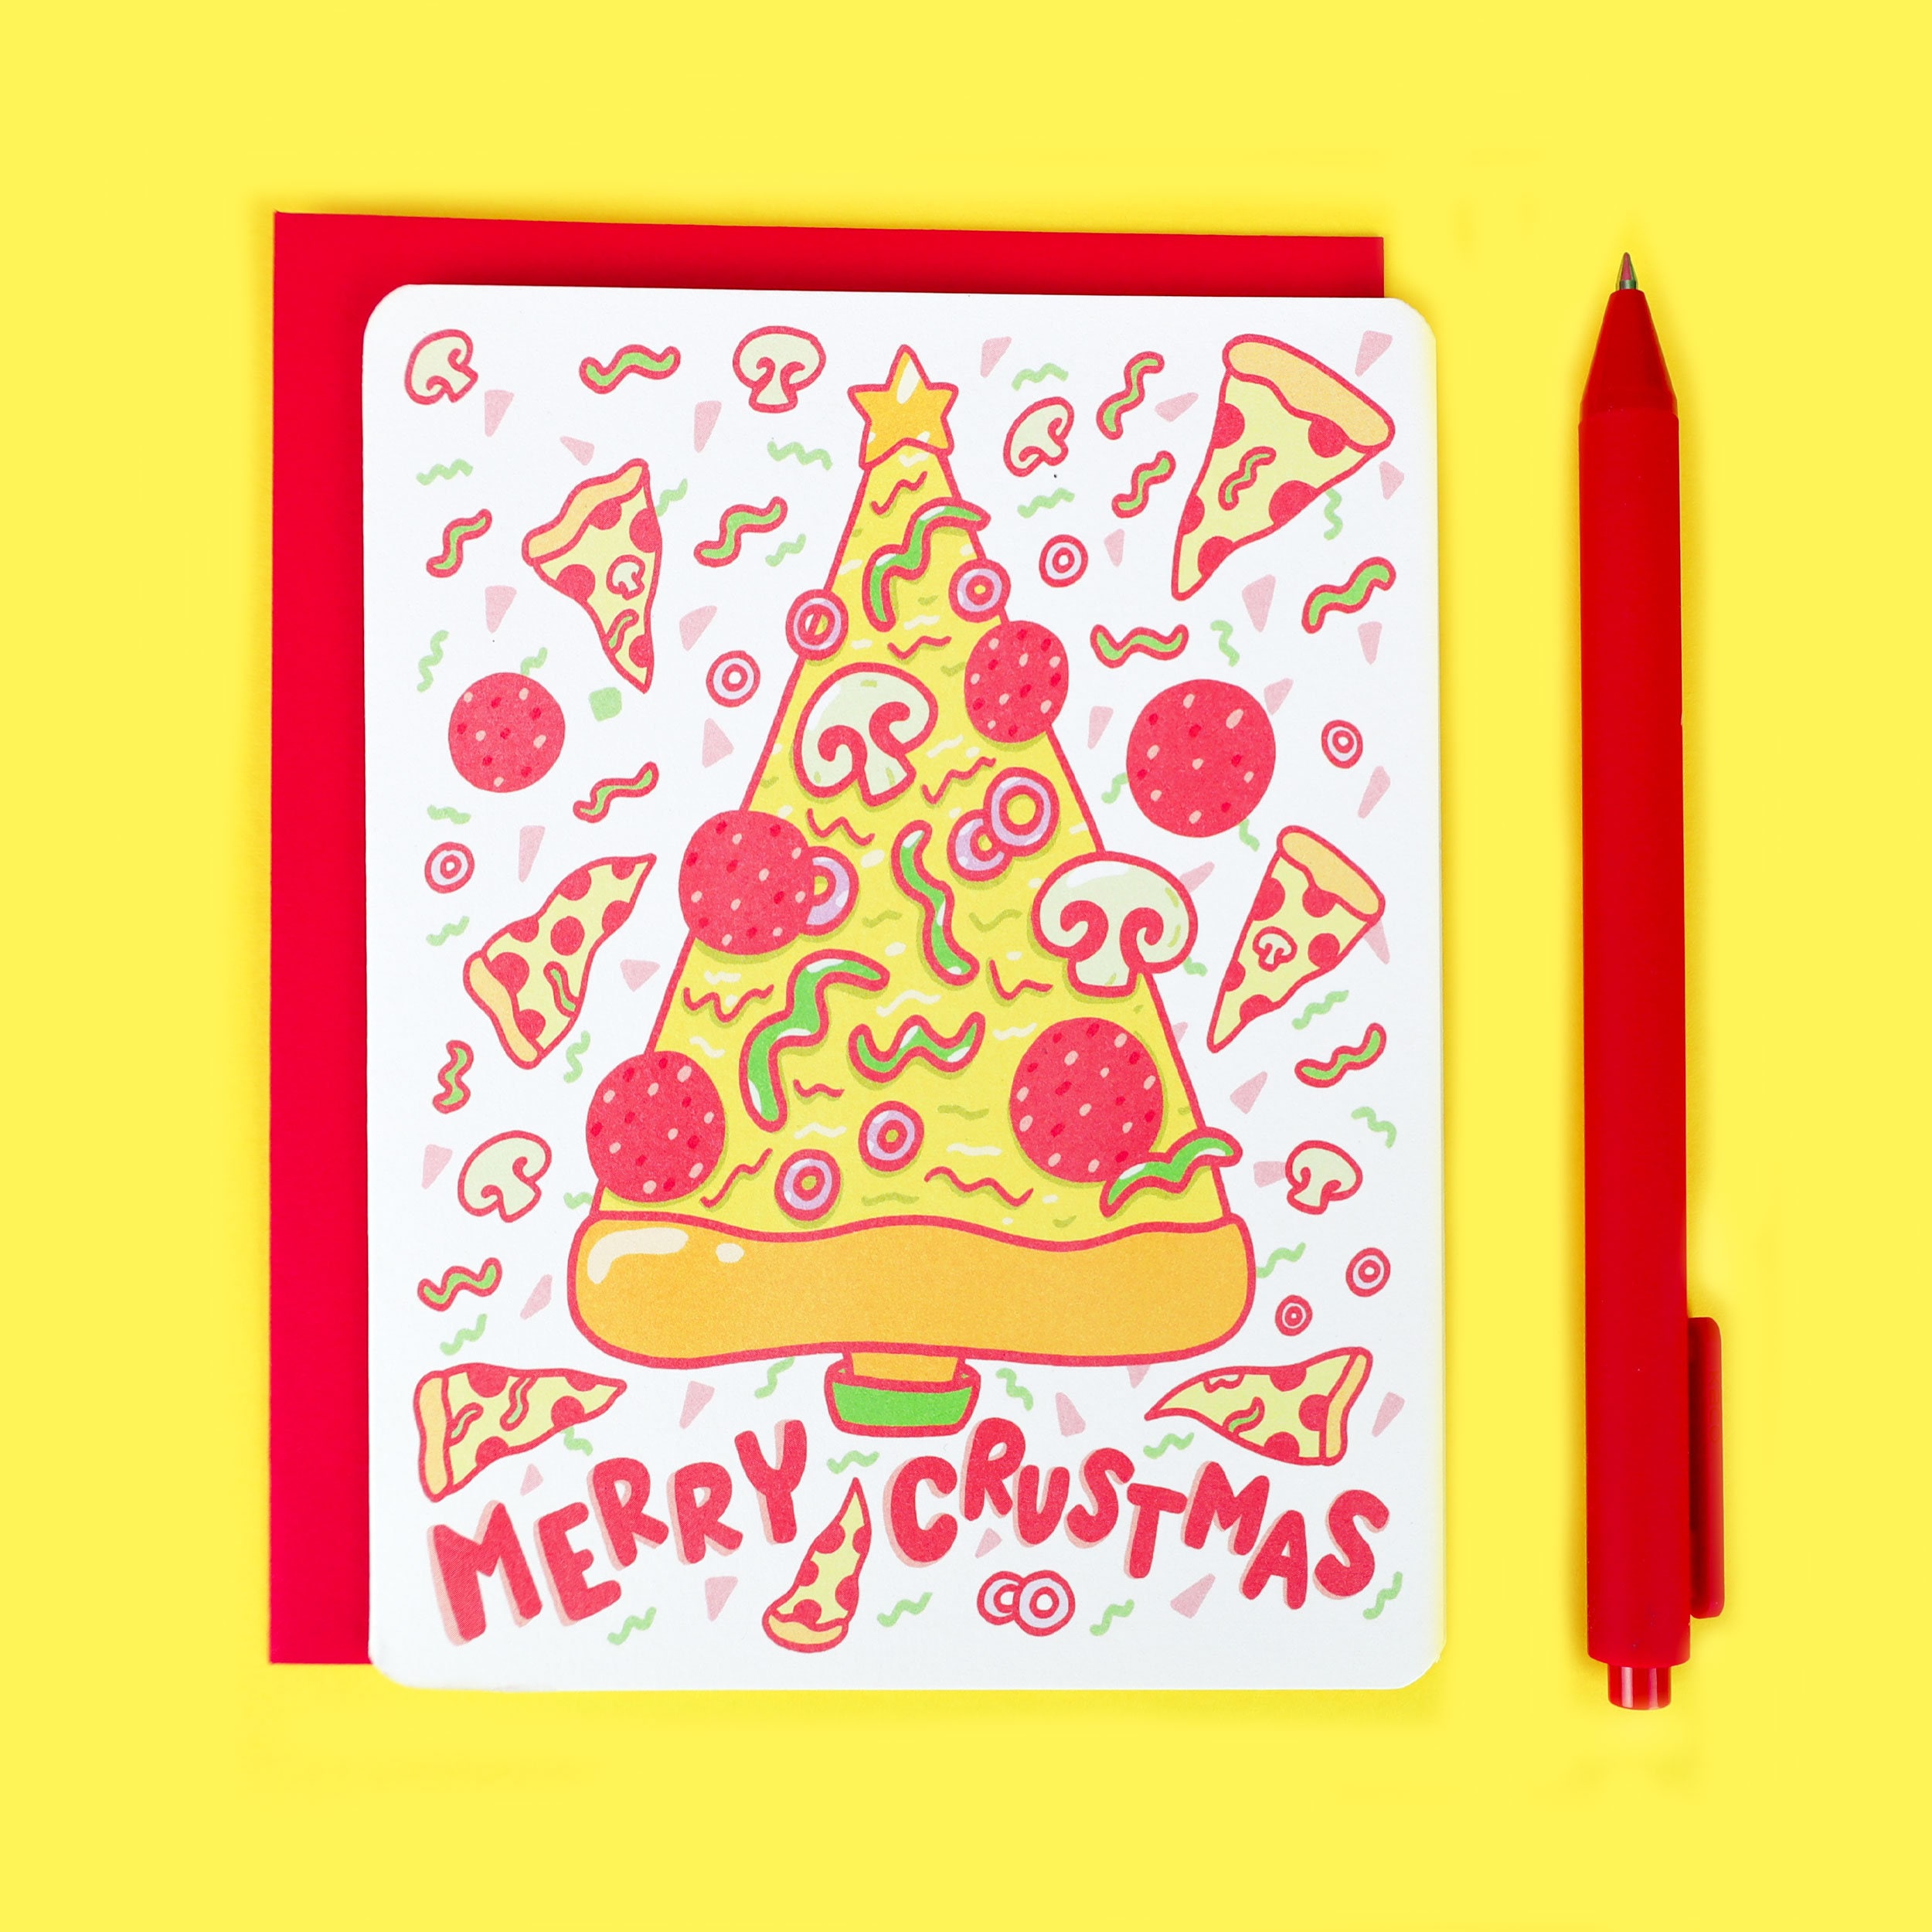 funny-pizza-christmas-card-card-merry-crustmas-holiday-etsy